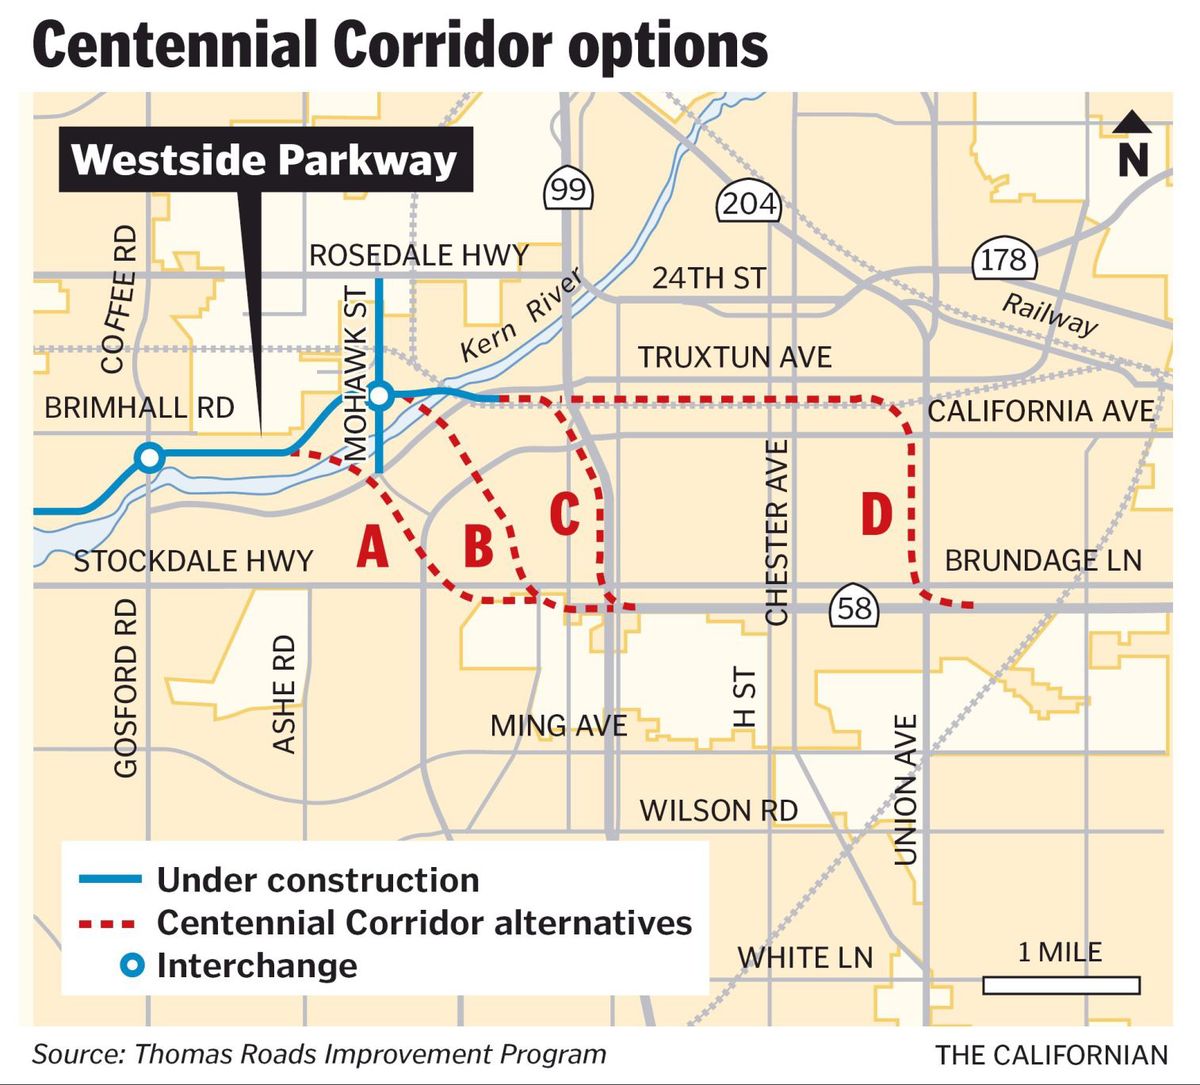 The alignments Caltrans studied for the Centennial Corridor, courtesy of the Bakersfield Californian.